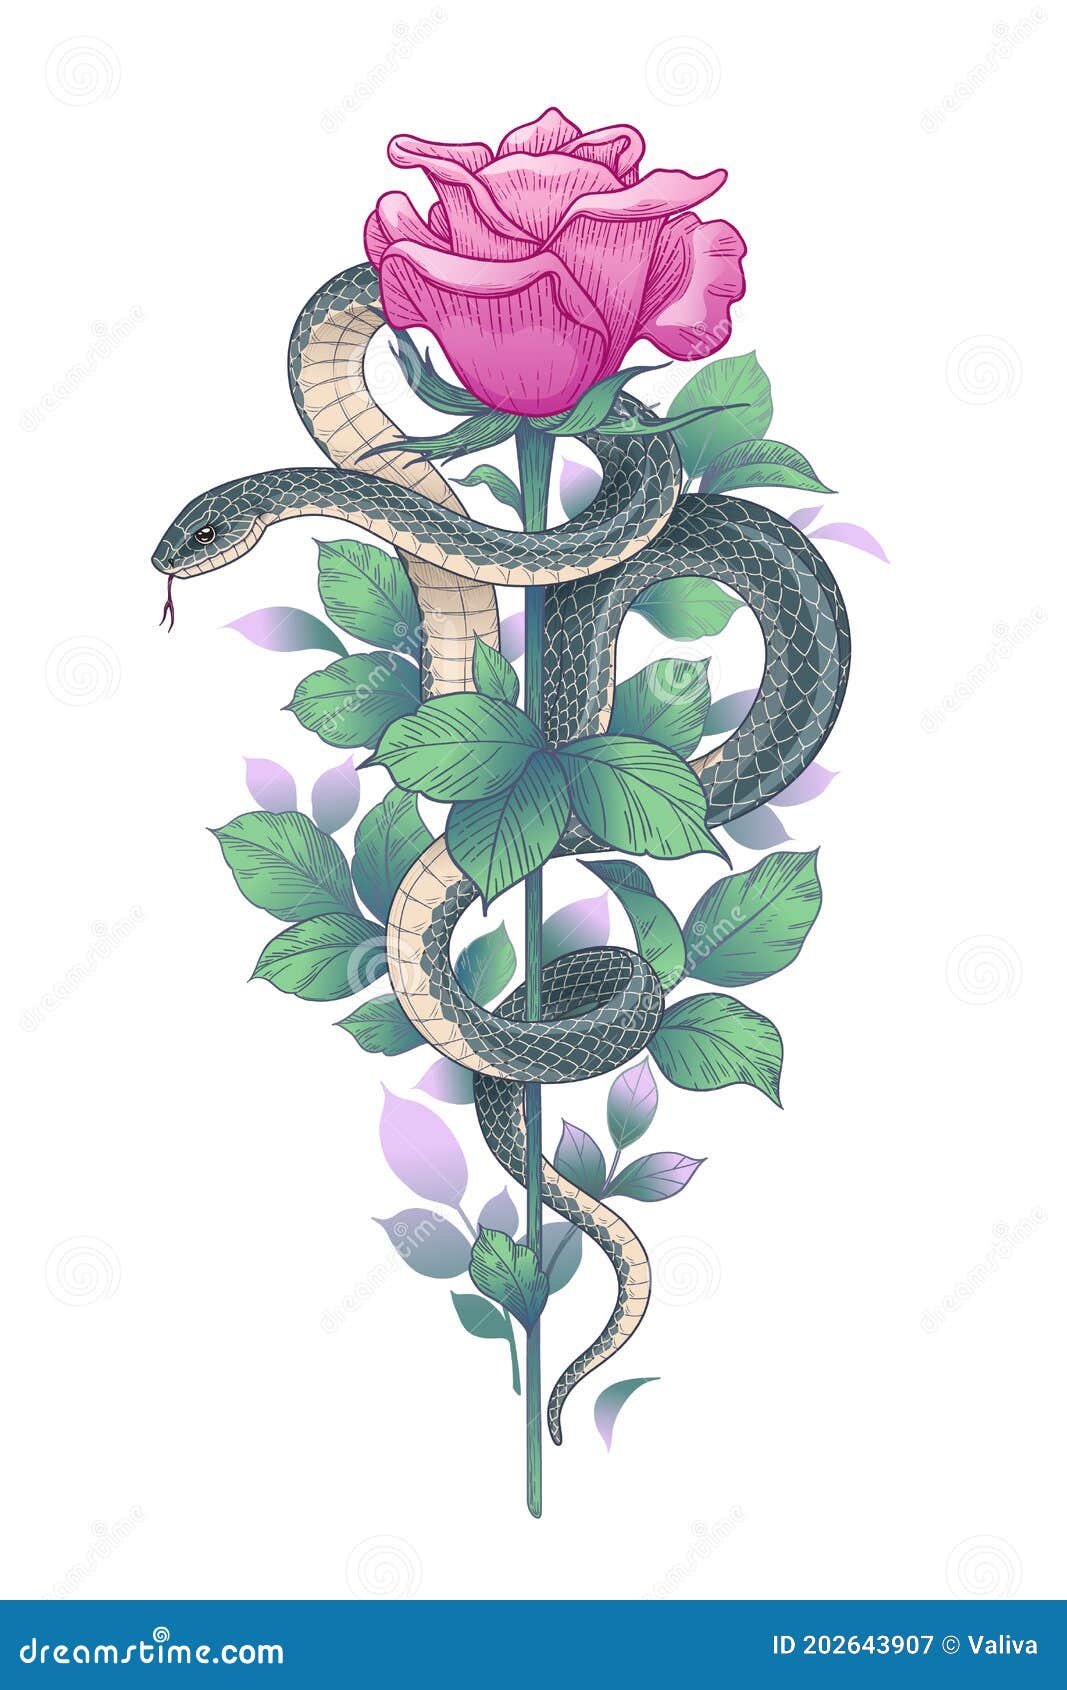  twisted snake and pink rose on high stem